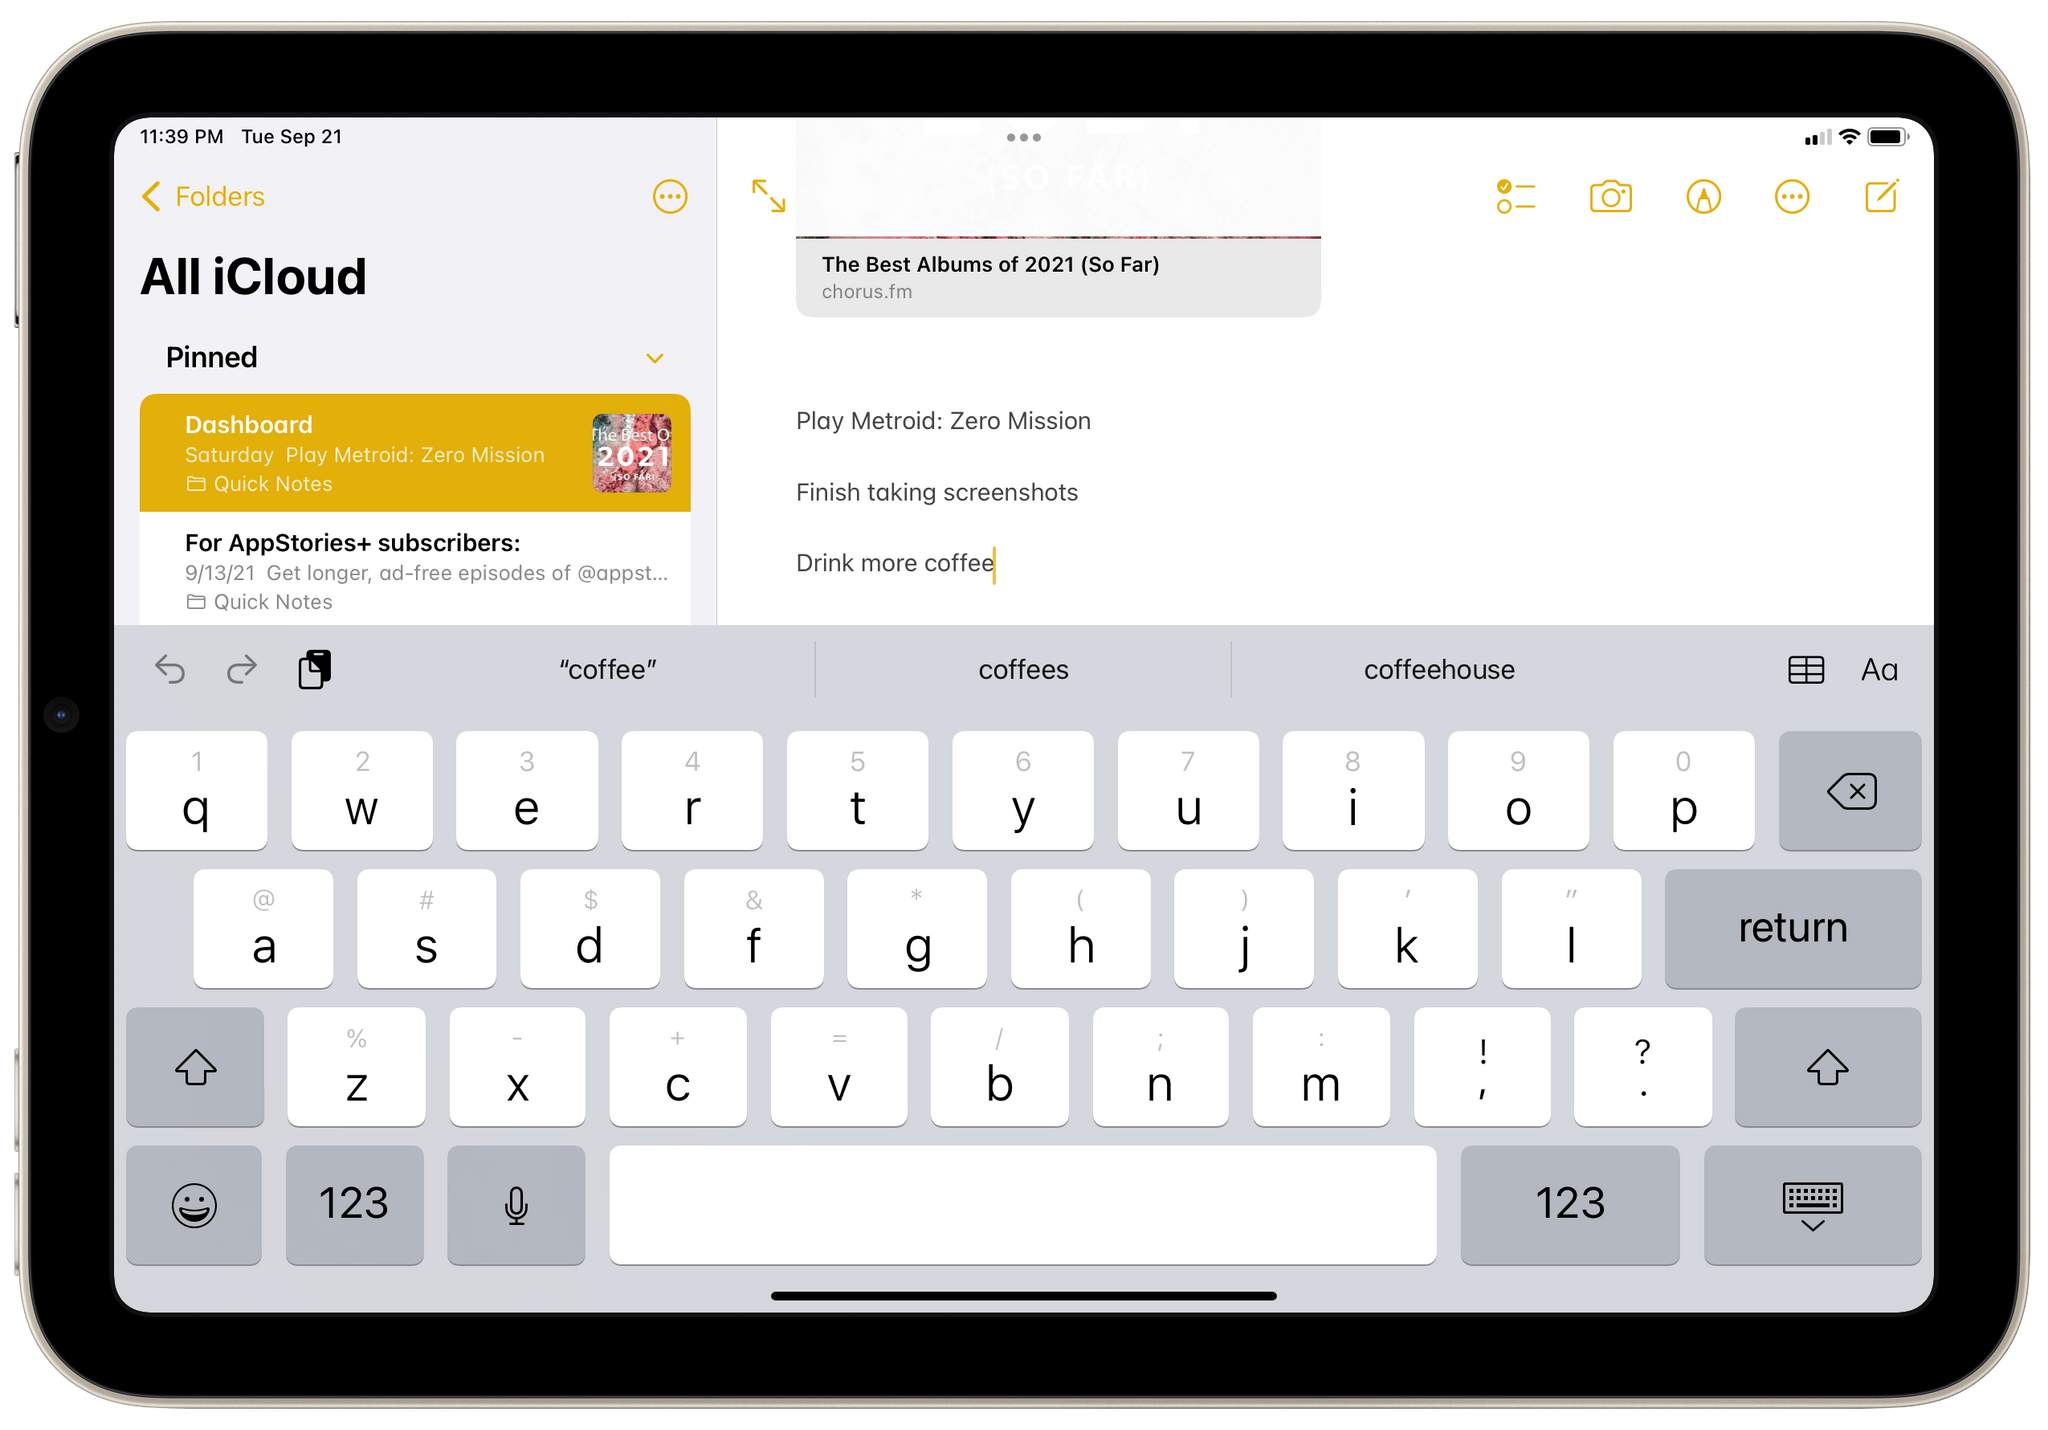 When the keyboard is shown in landscape mode, you don't see a lot of text on the new iPad mini.